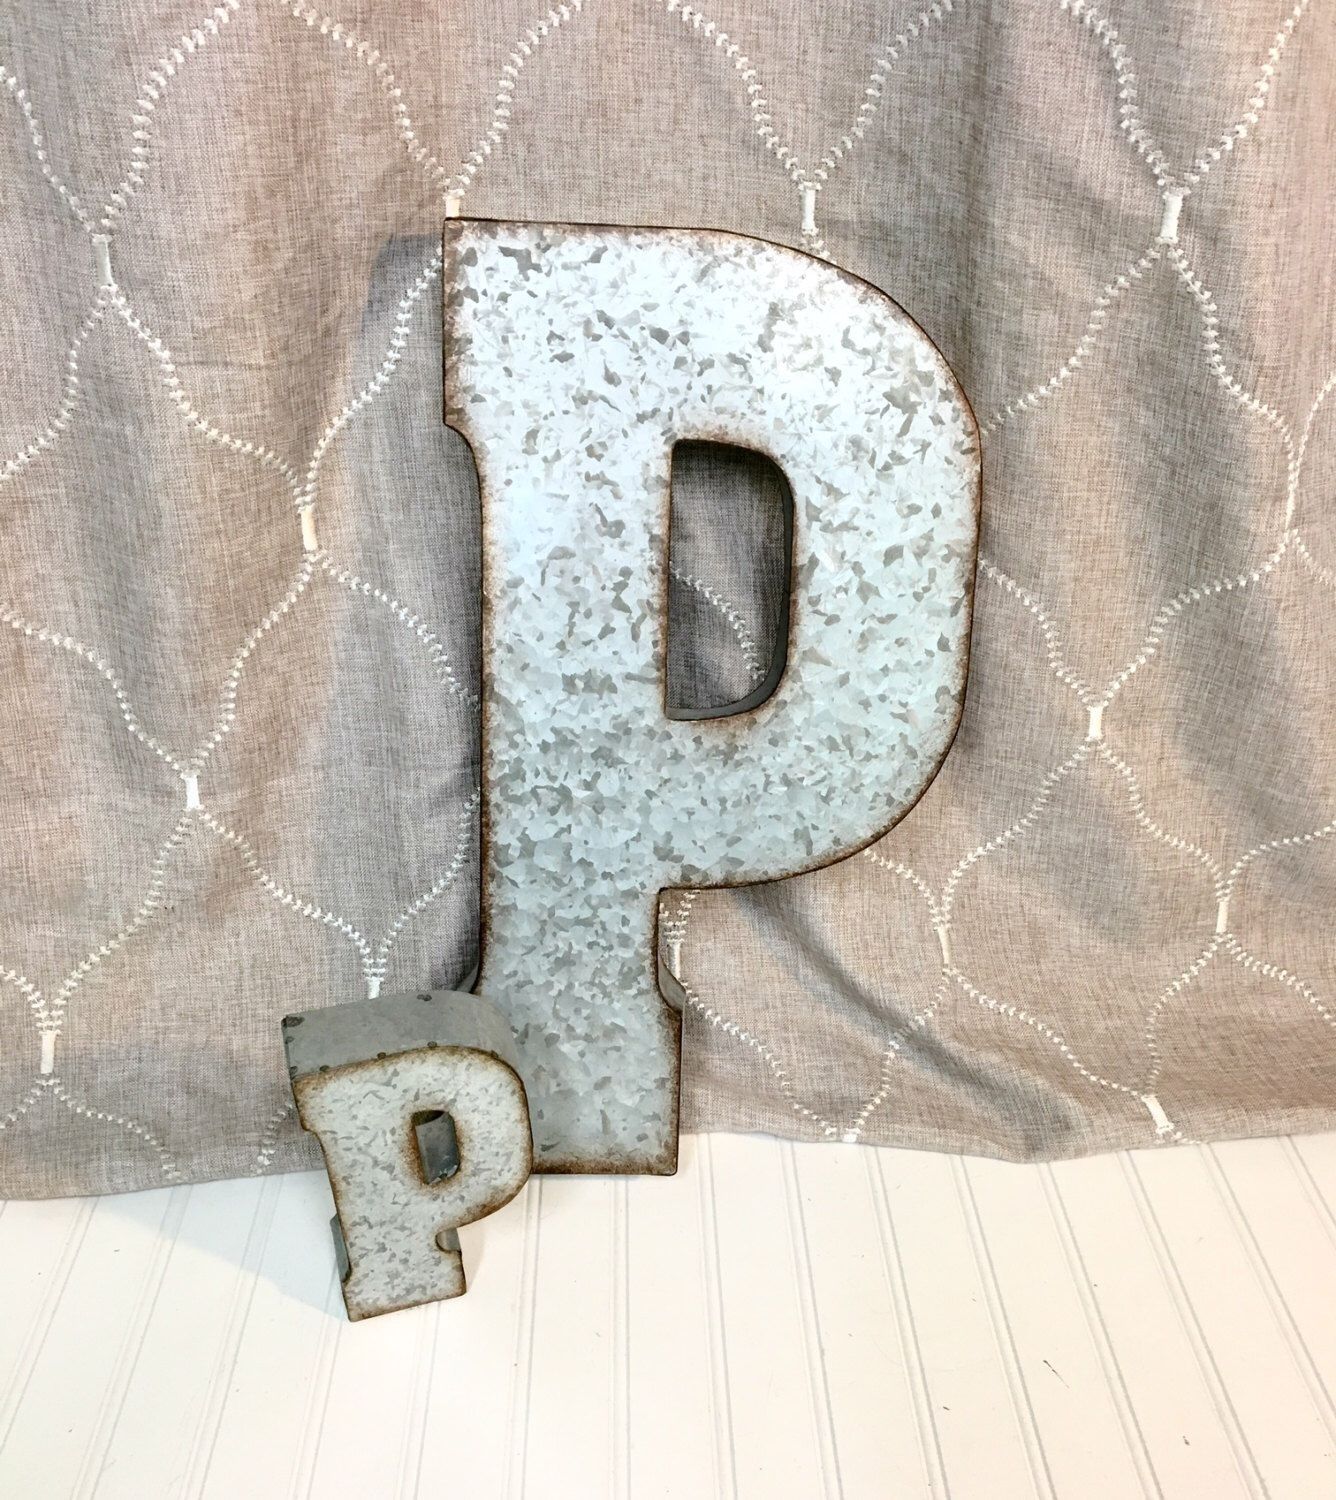 Galvanized Metal Letter/letter P/galvanized Metal Wall Letter/large Intended For Metal Letter Wall Art (View 7 of 20)